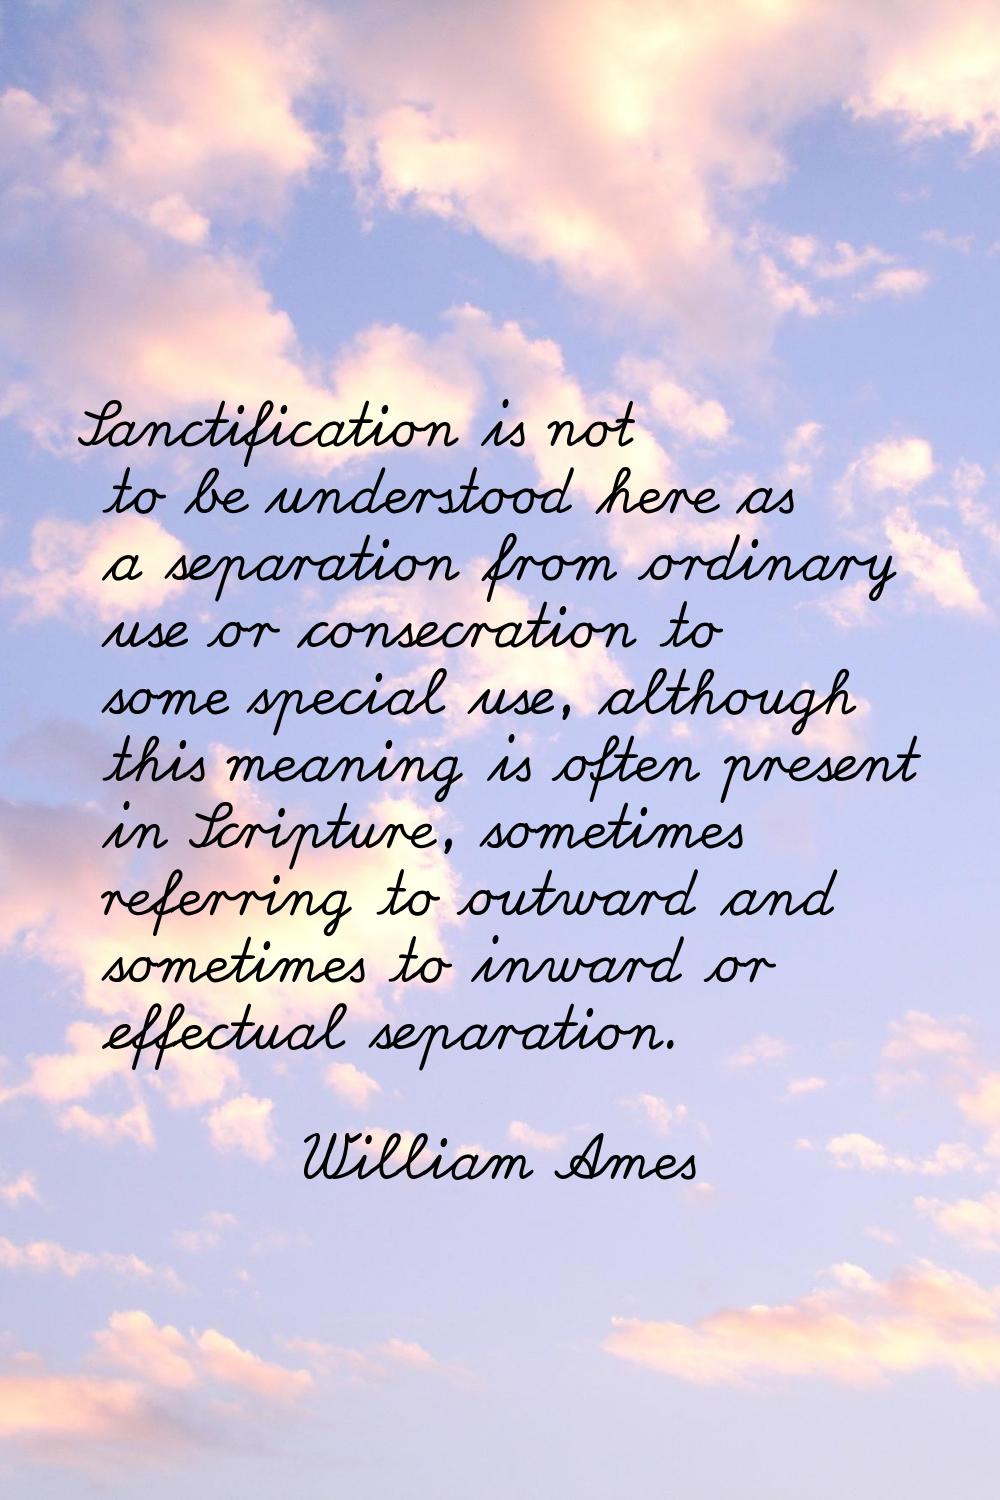 Sanctification is not to be understood here as a separation from ordinary use or consecration to so